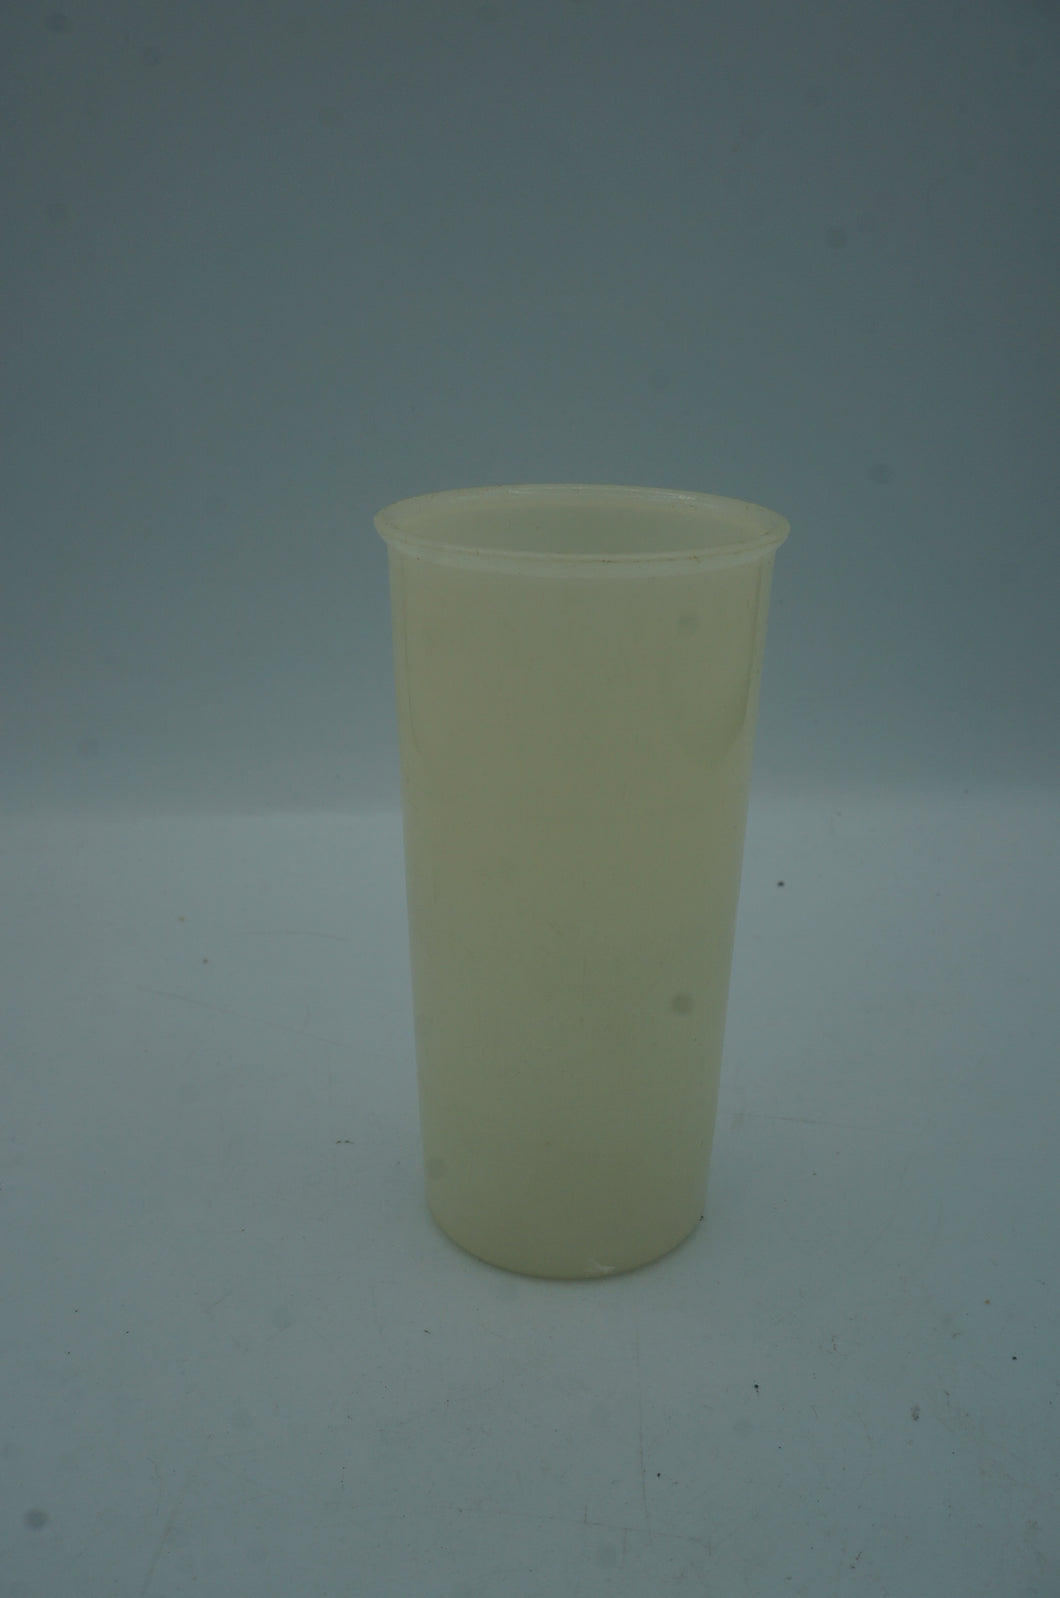 small vintage Tupperware cup- ohiohippies.com